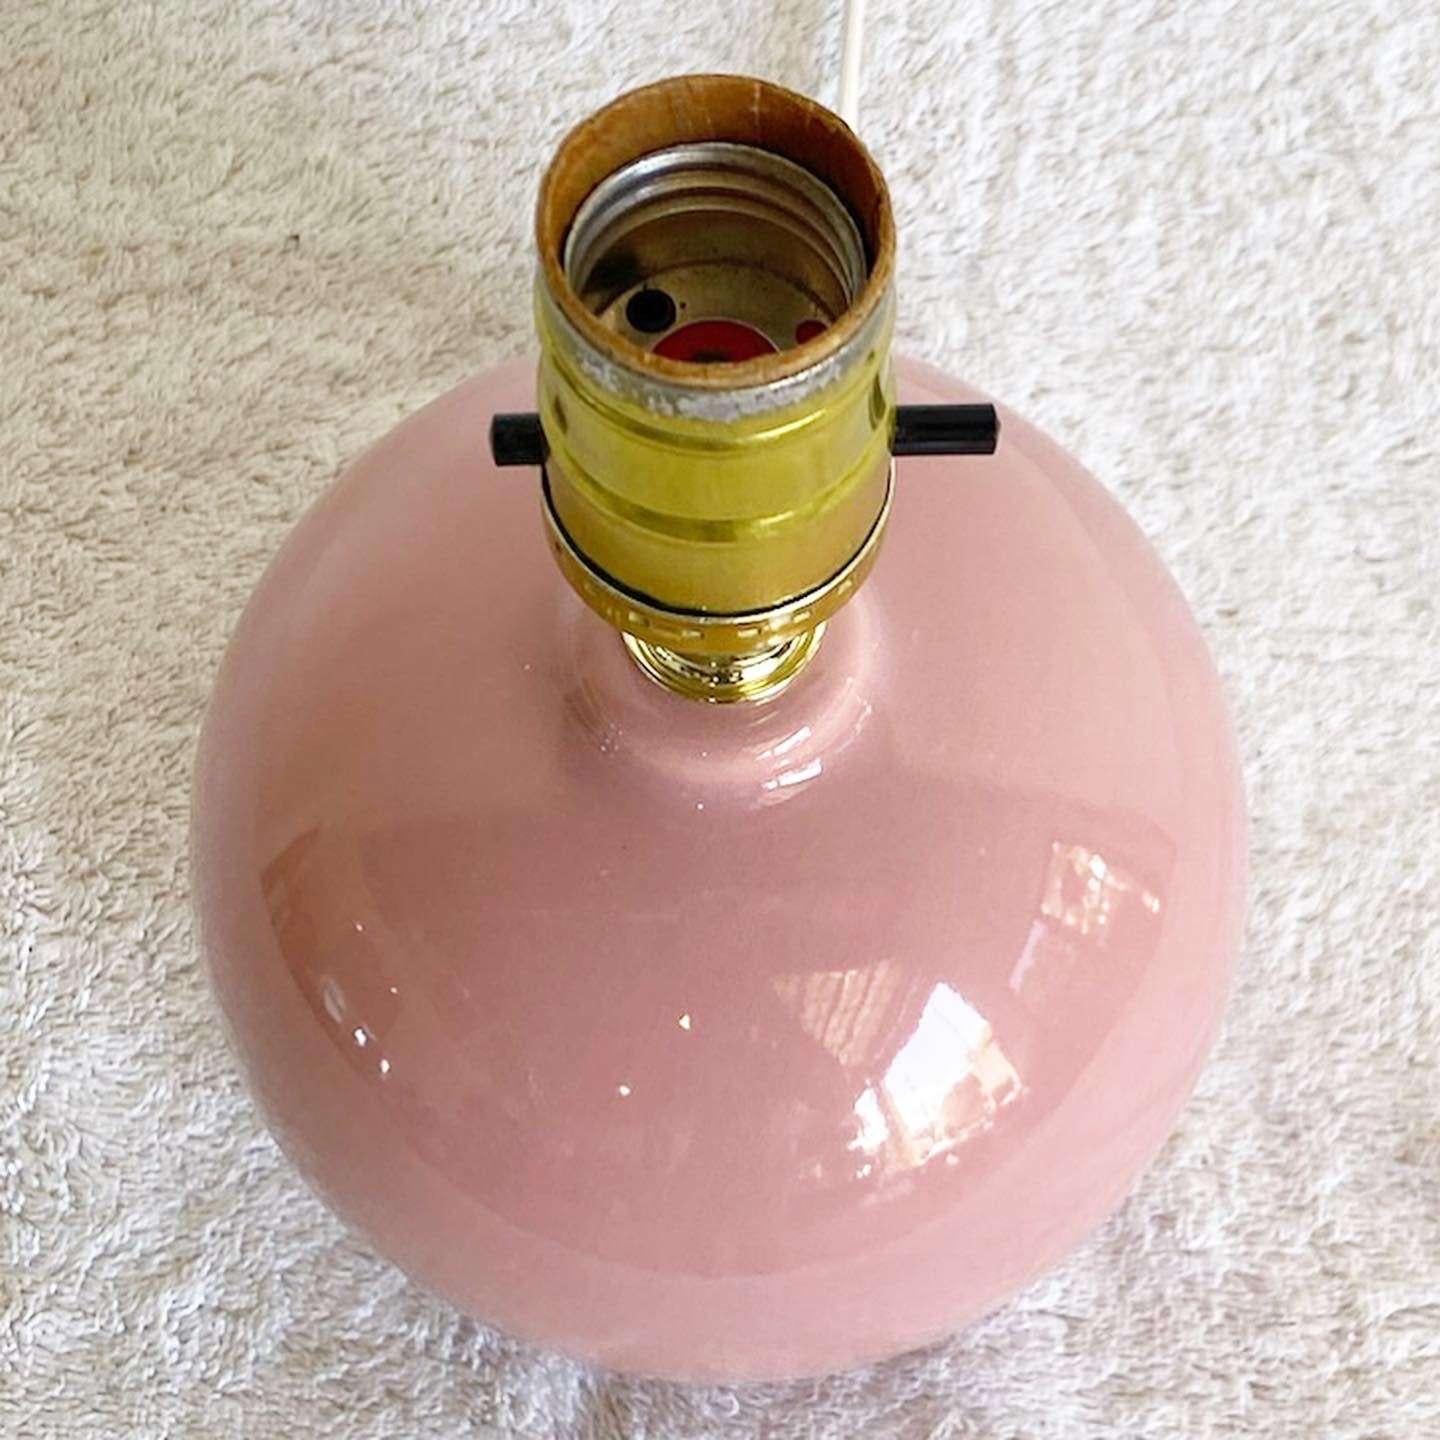 Amazing vintage postmodern spherical miniature table lamp. Features a glossy pink mauve finish.